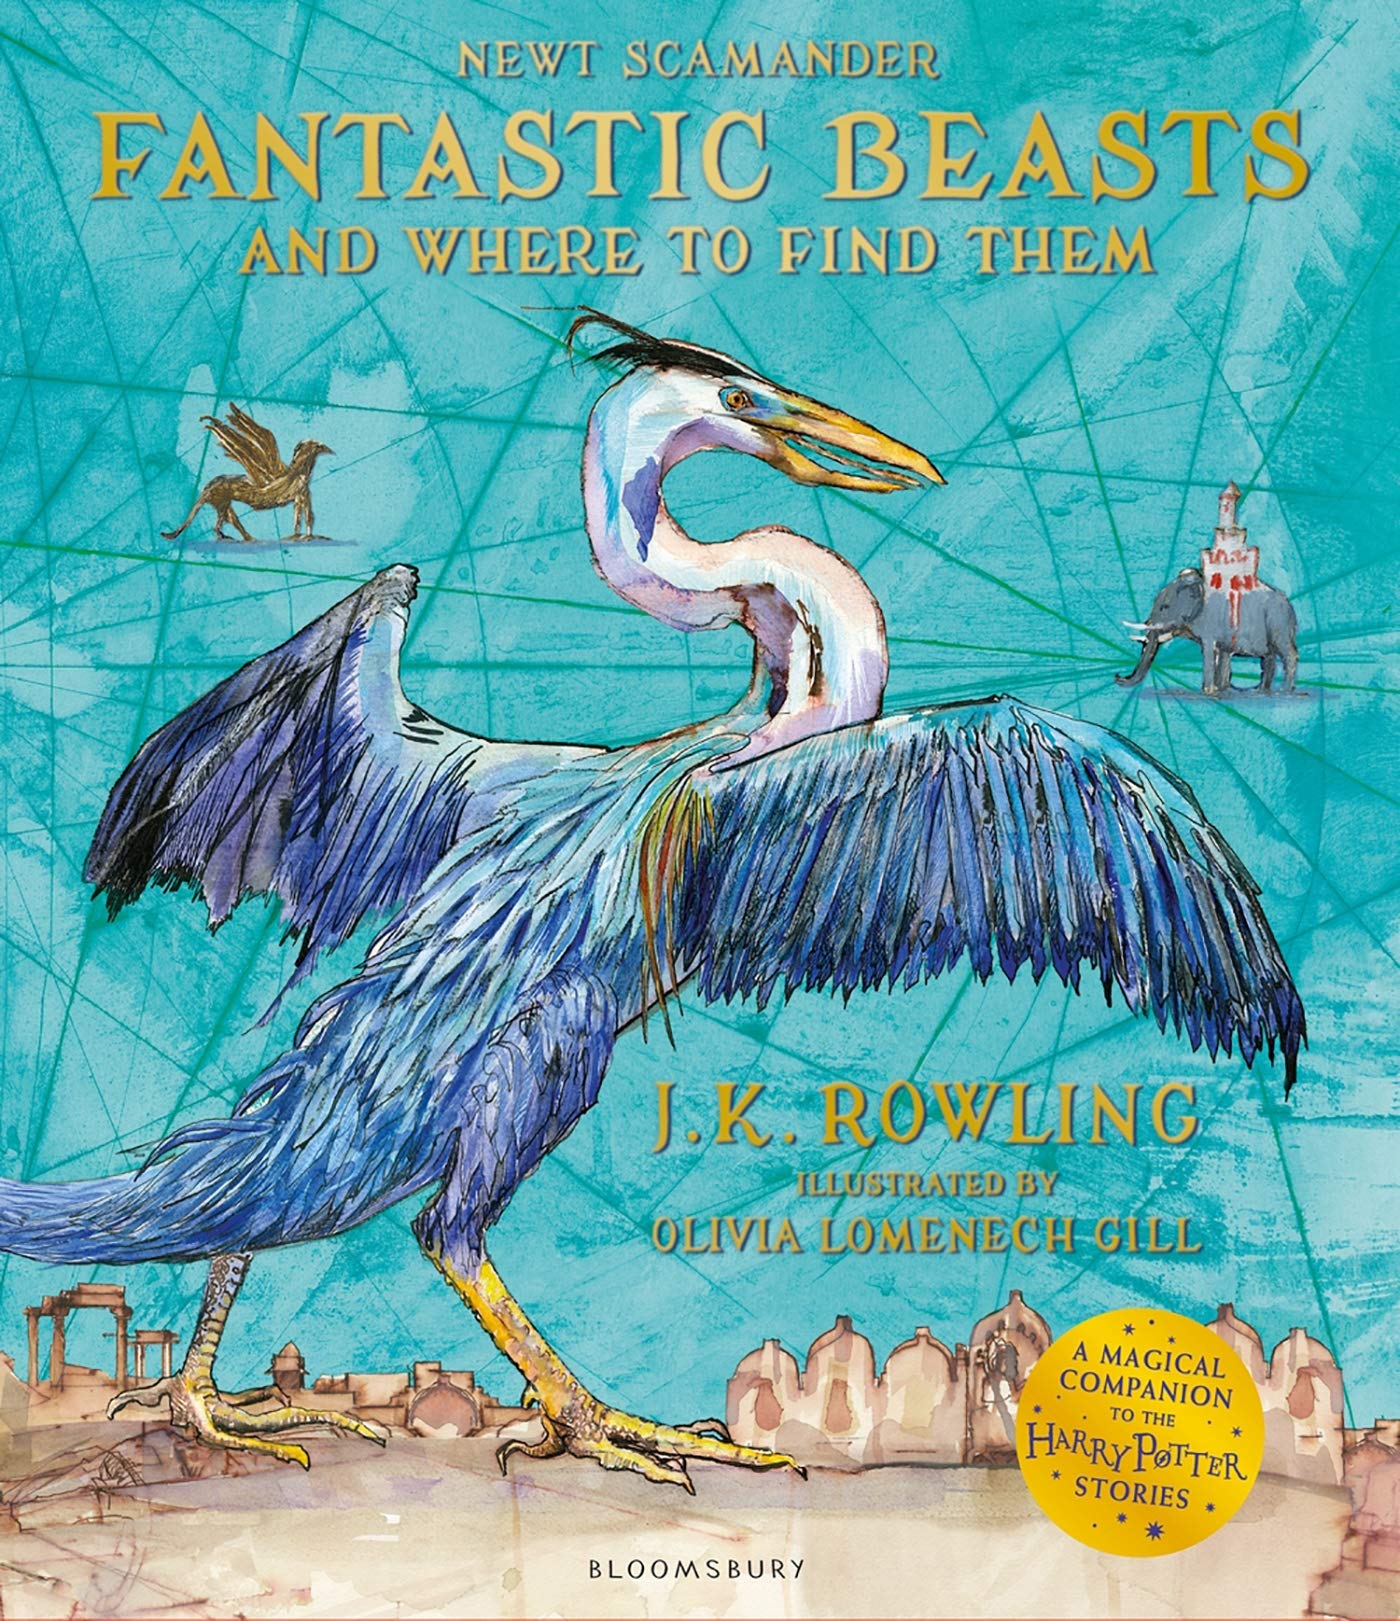 Fantastic Beasts and Where to Find Them | J.K. Rowling